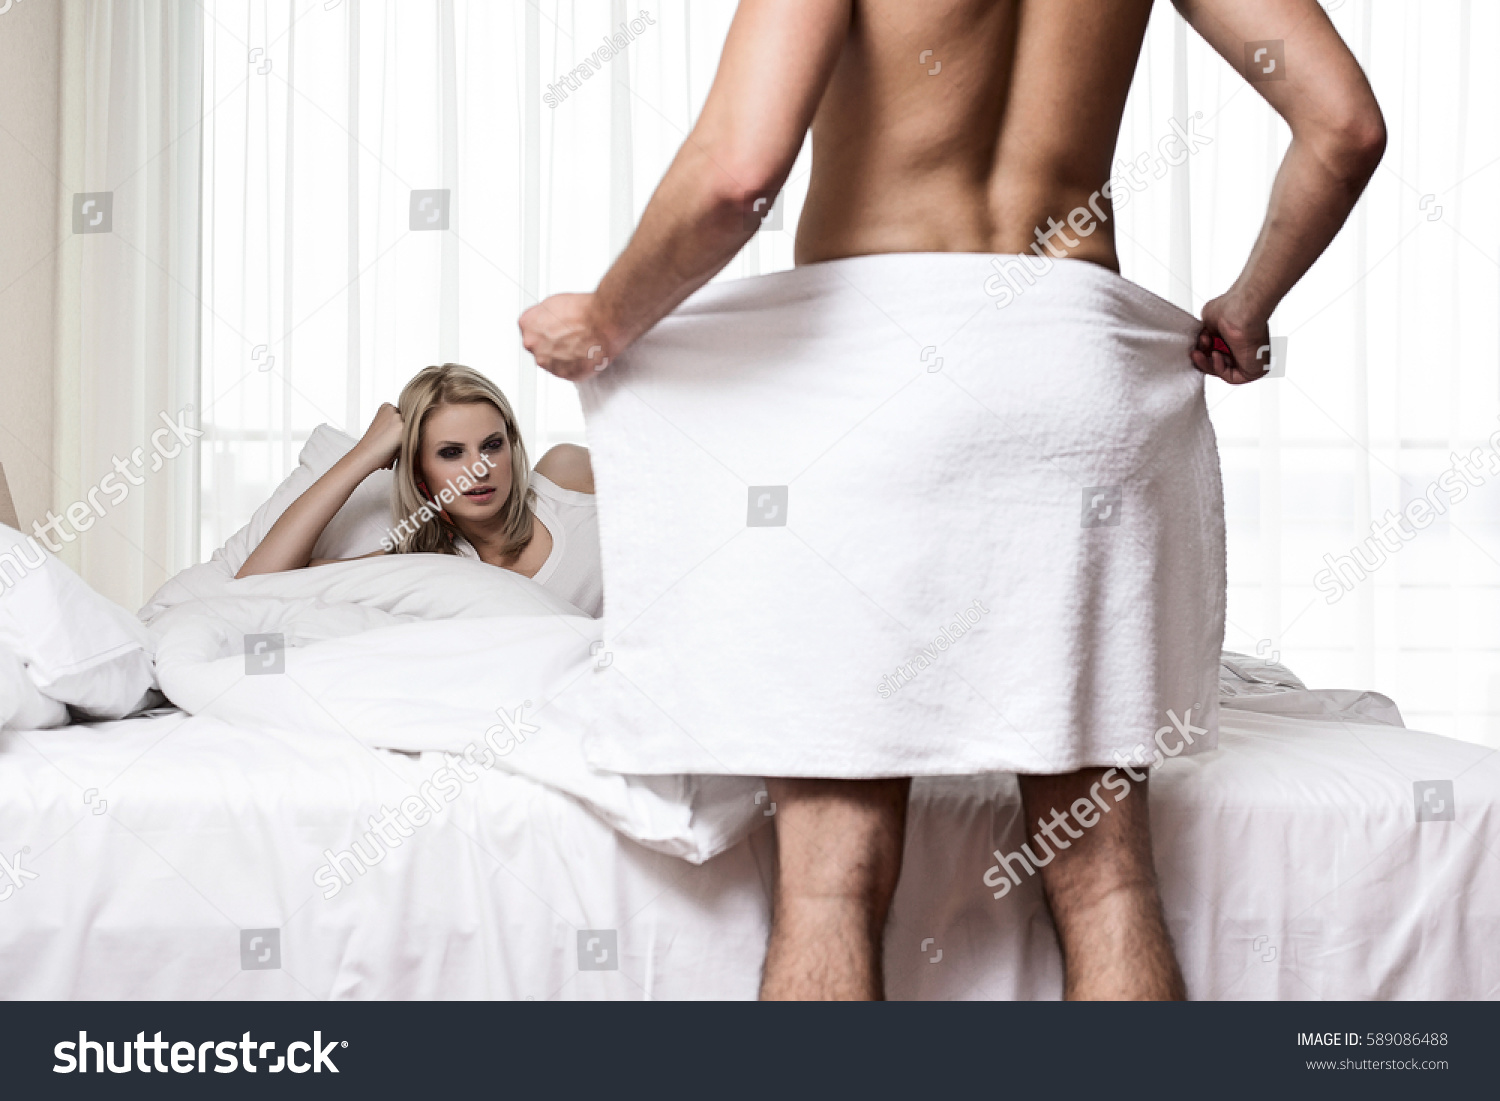 Young Woman Staring At Naked Man Holding Towel In Bedroom 